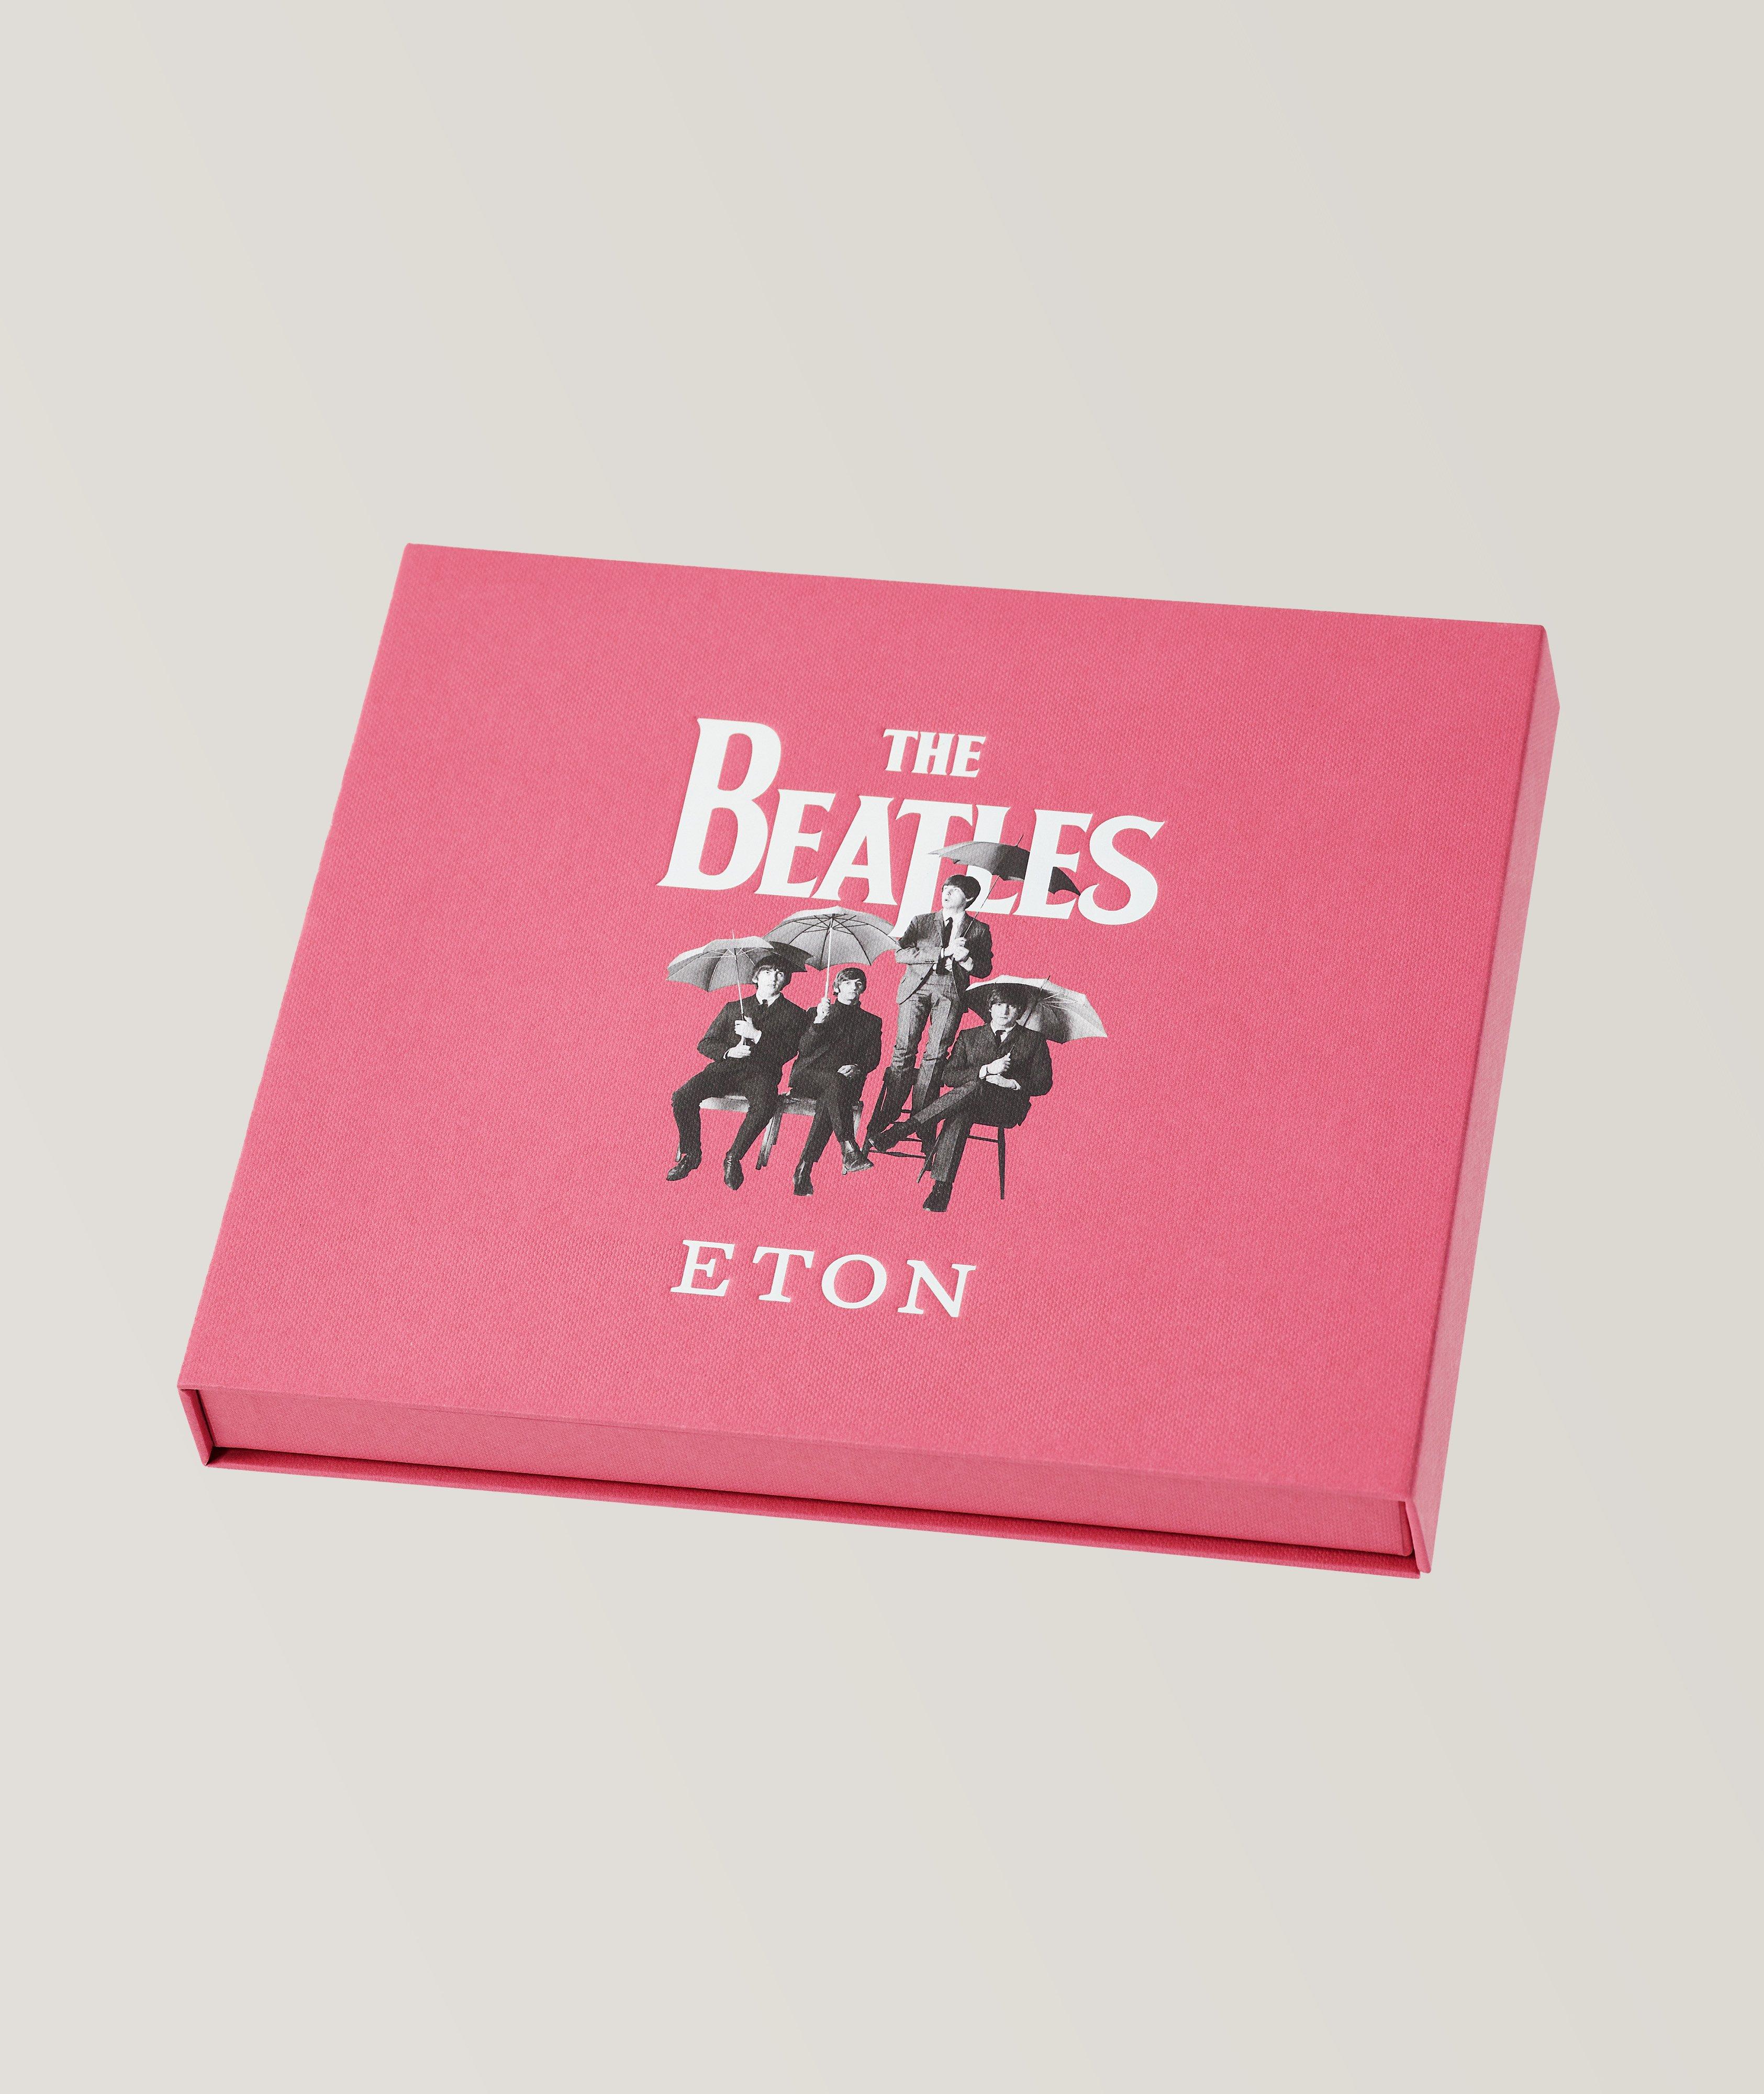 The Beatles Collection "Is Cest Brauch Que" Silk Pocket Square